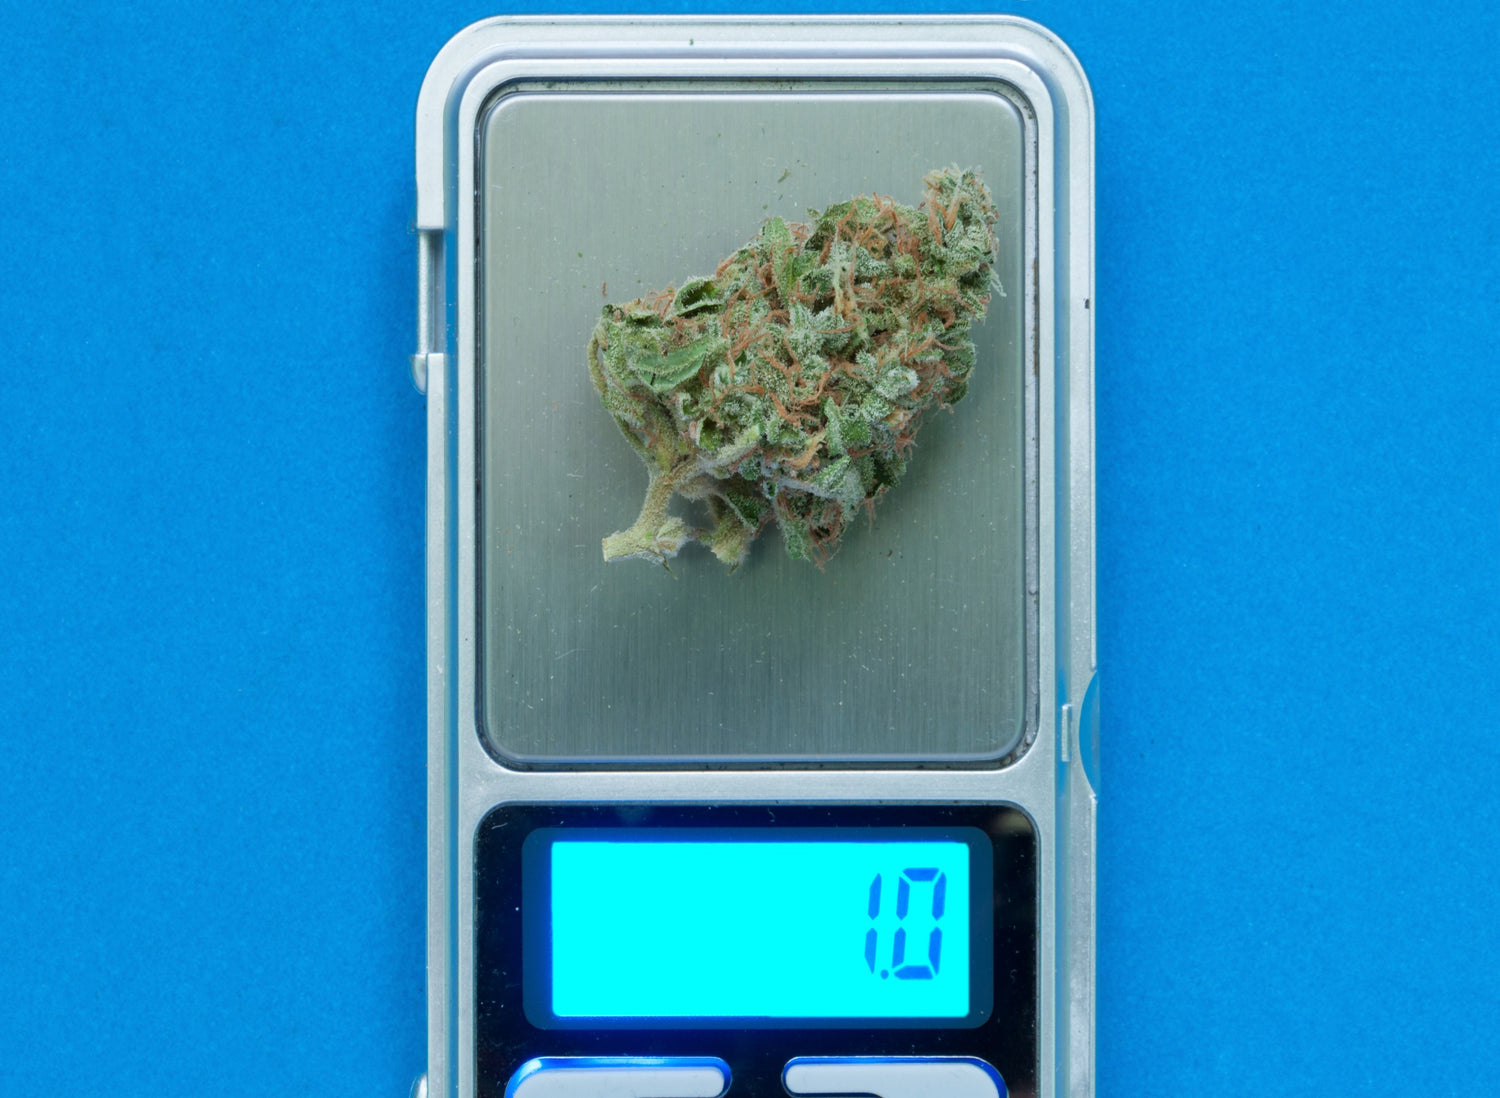 How Many Grams Are In An Ounce Of Marijuana?